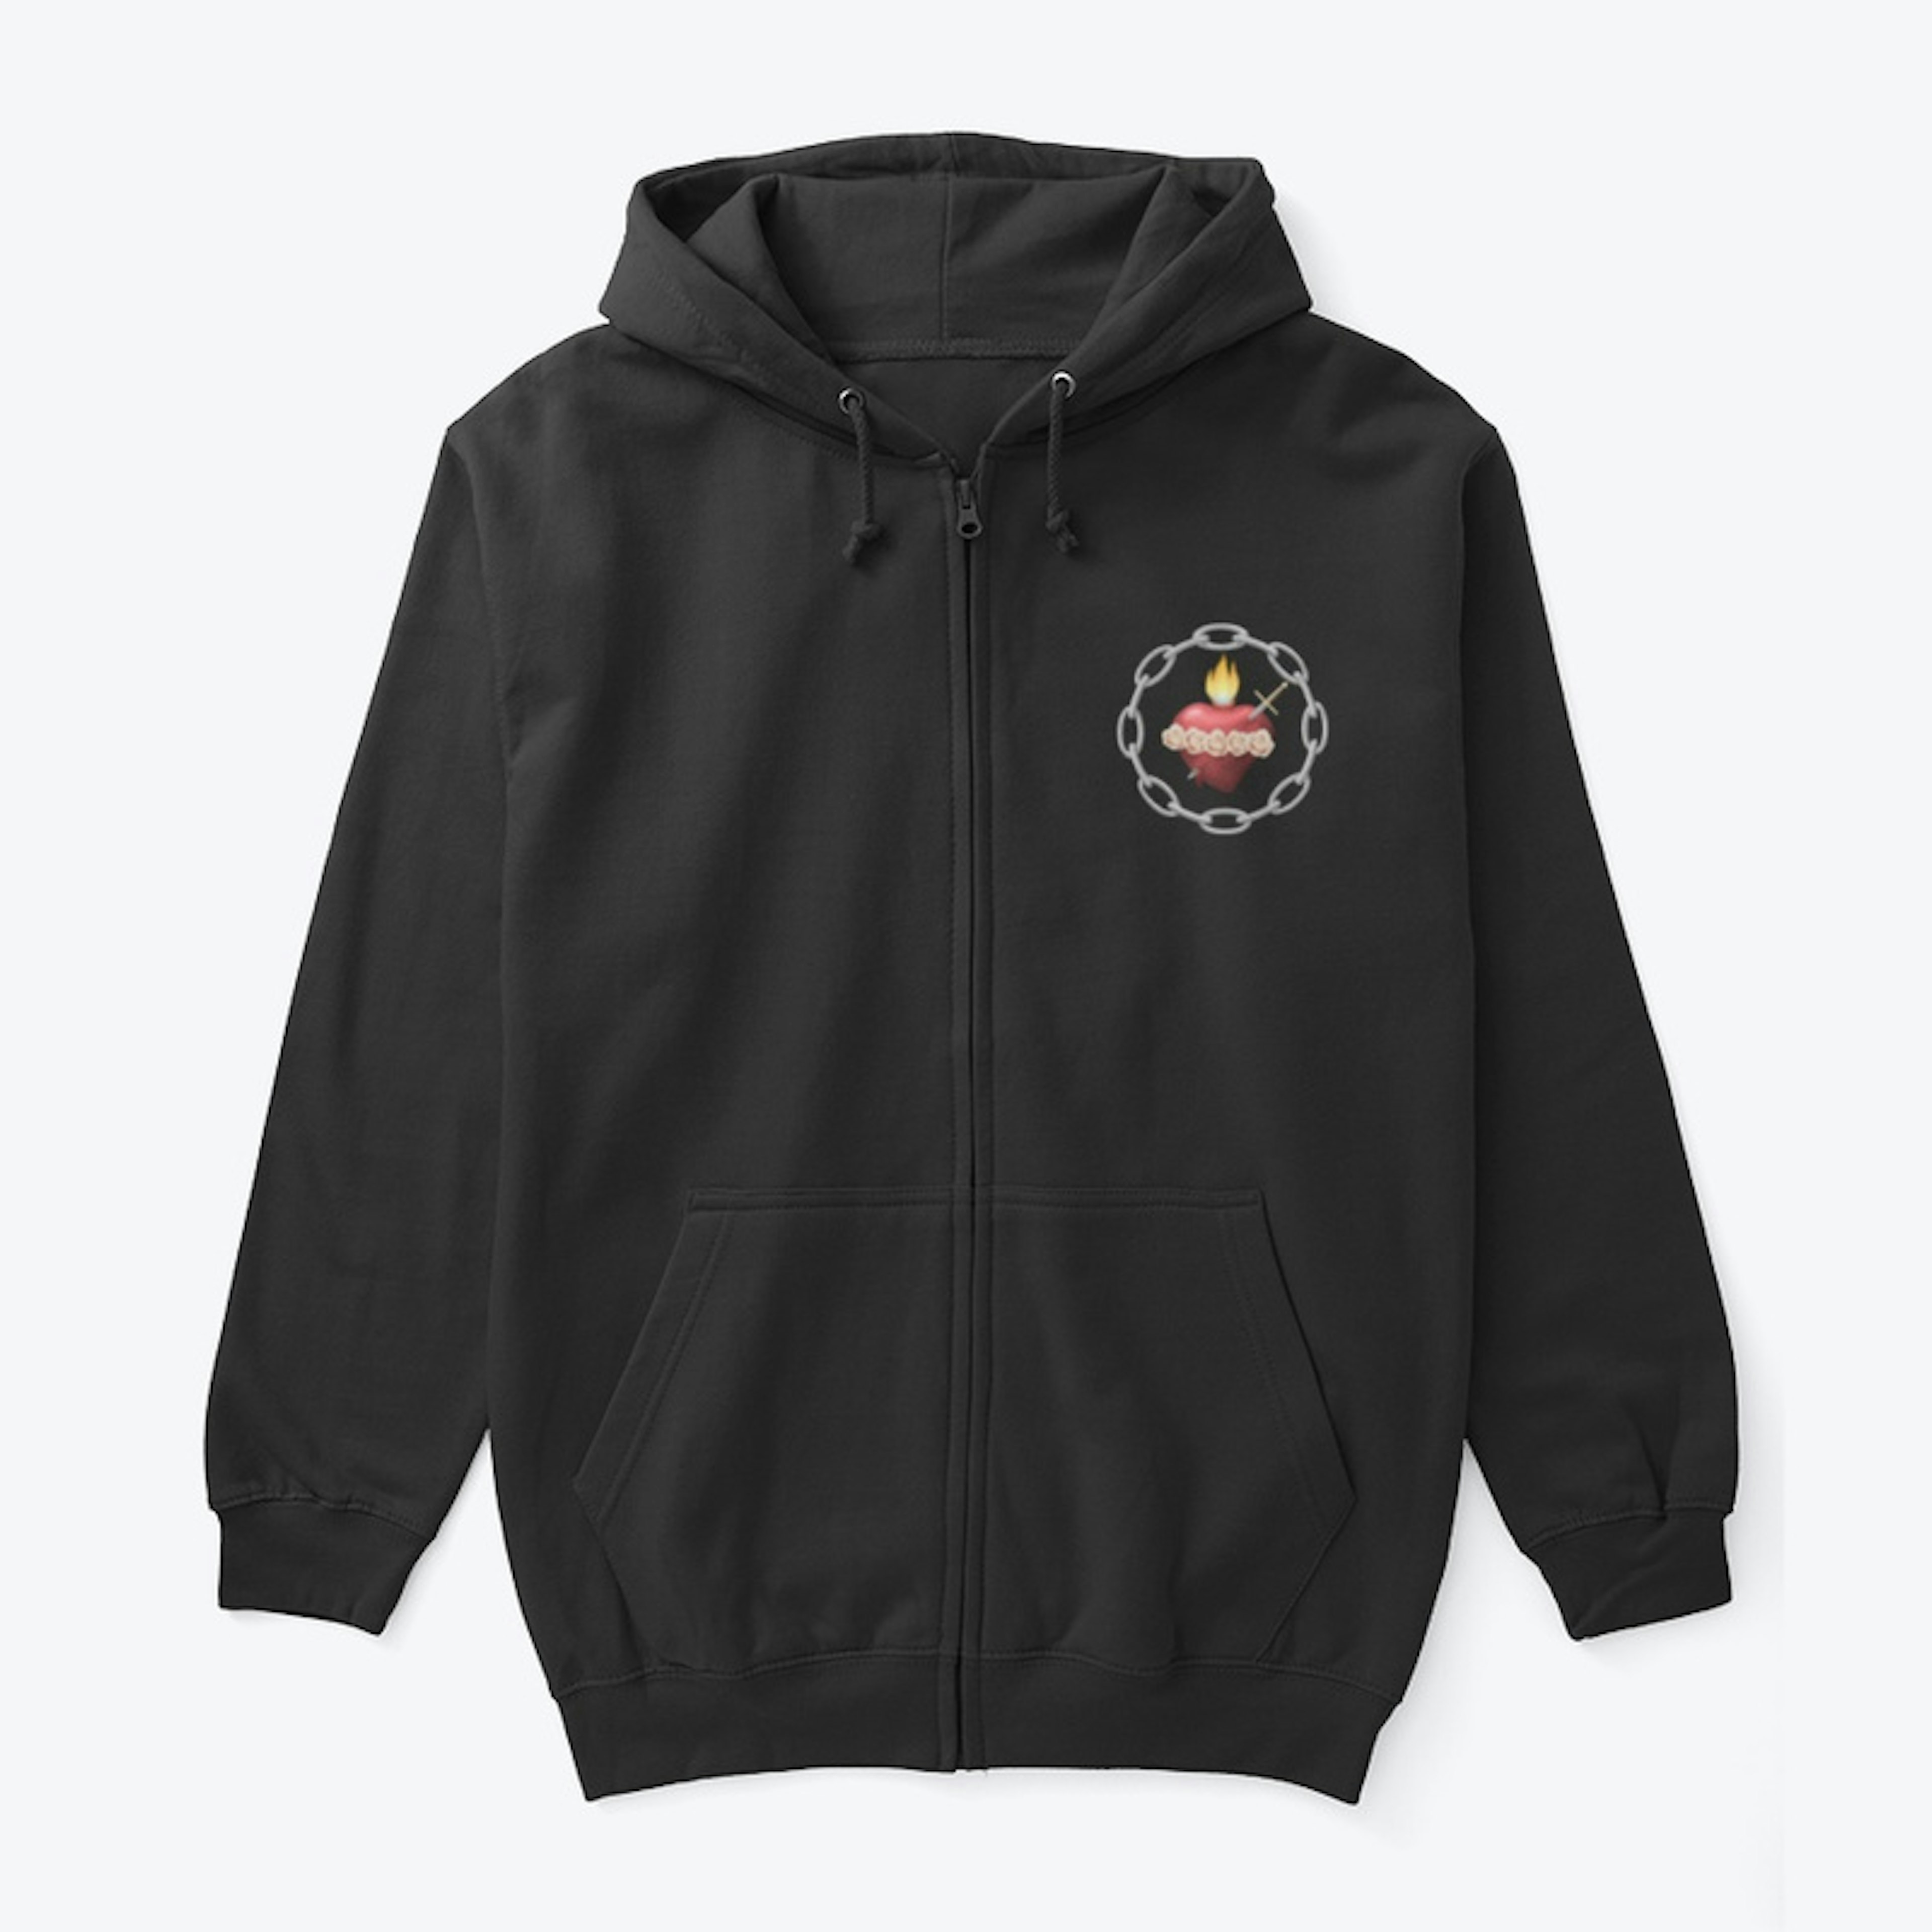 Zipper Hoodie with Emblem on Side